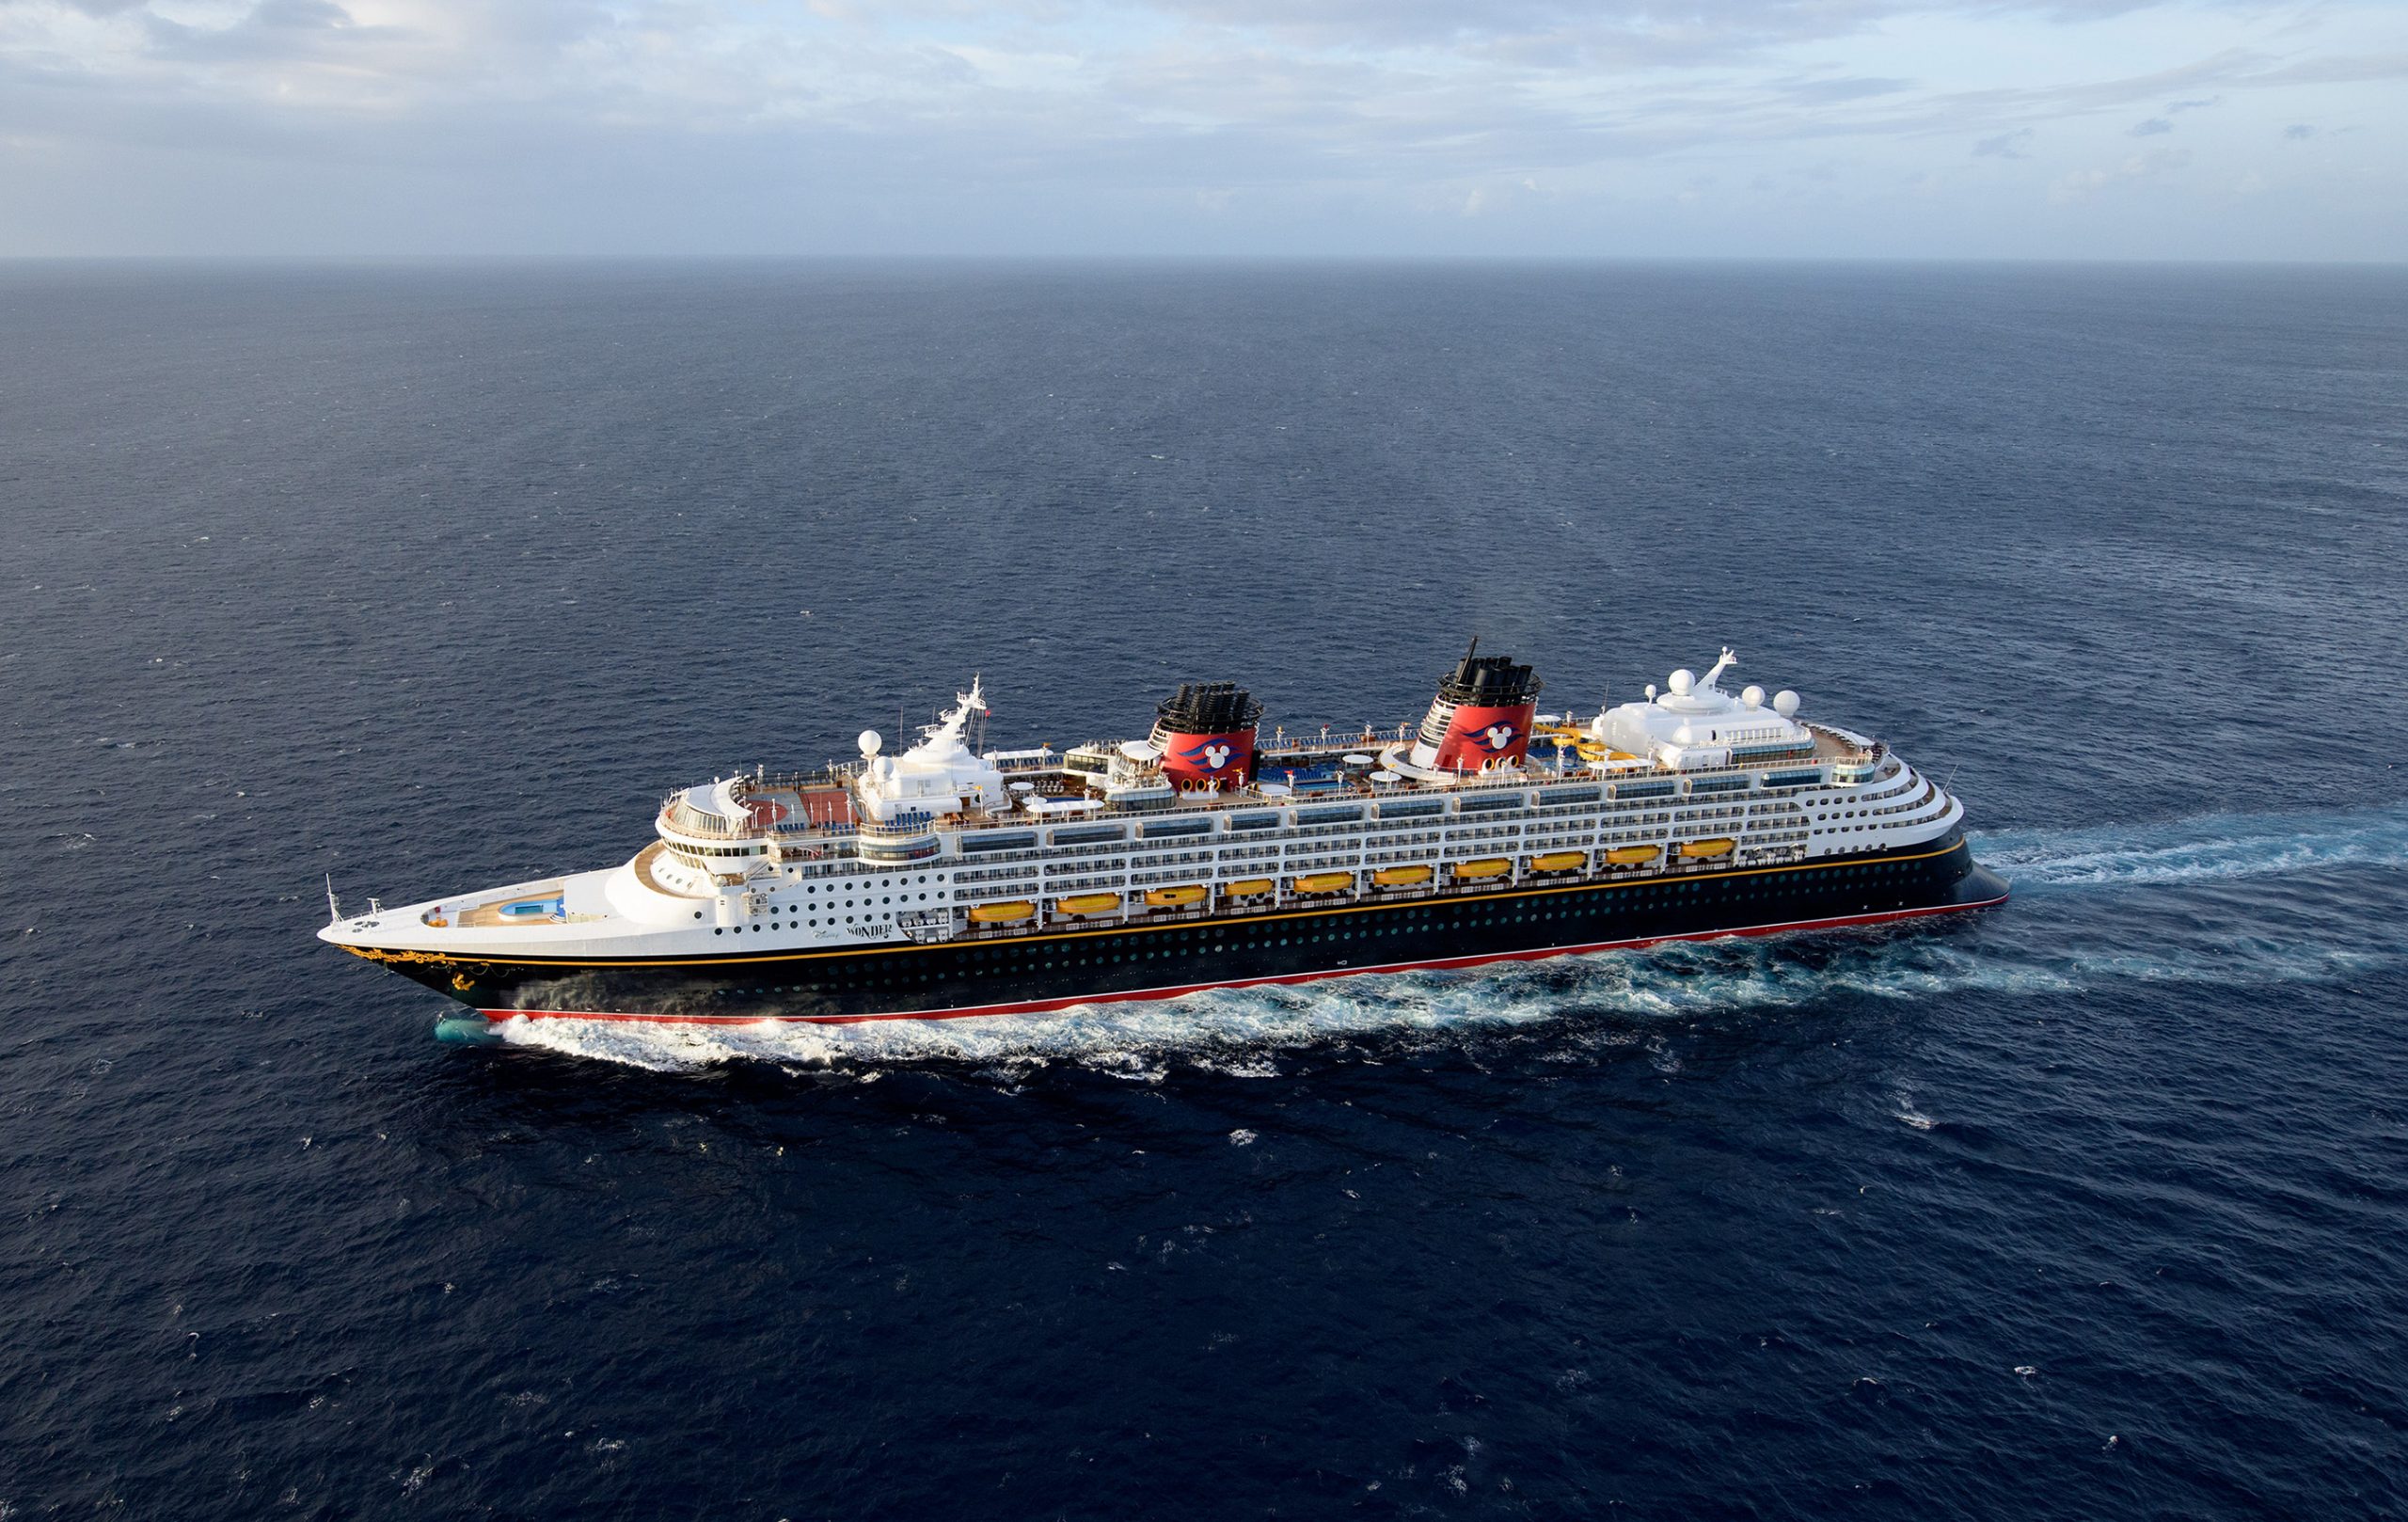 The Disney Wonder is setting sail for Europe